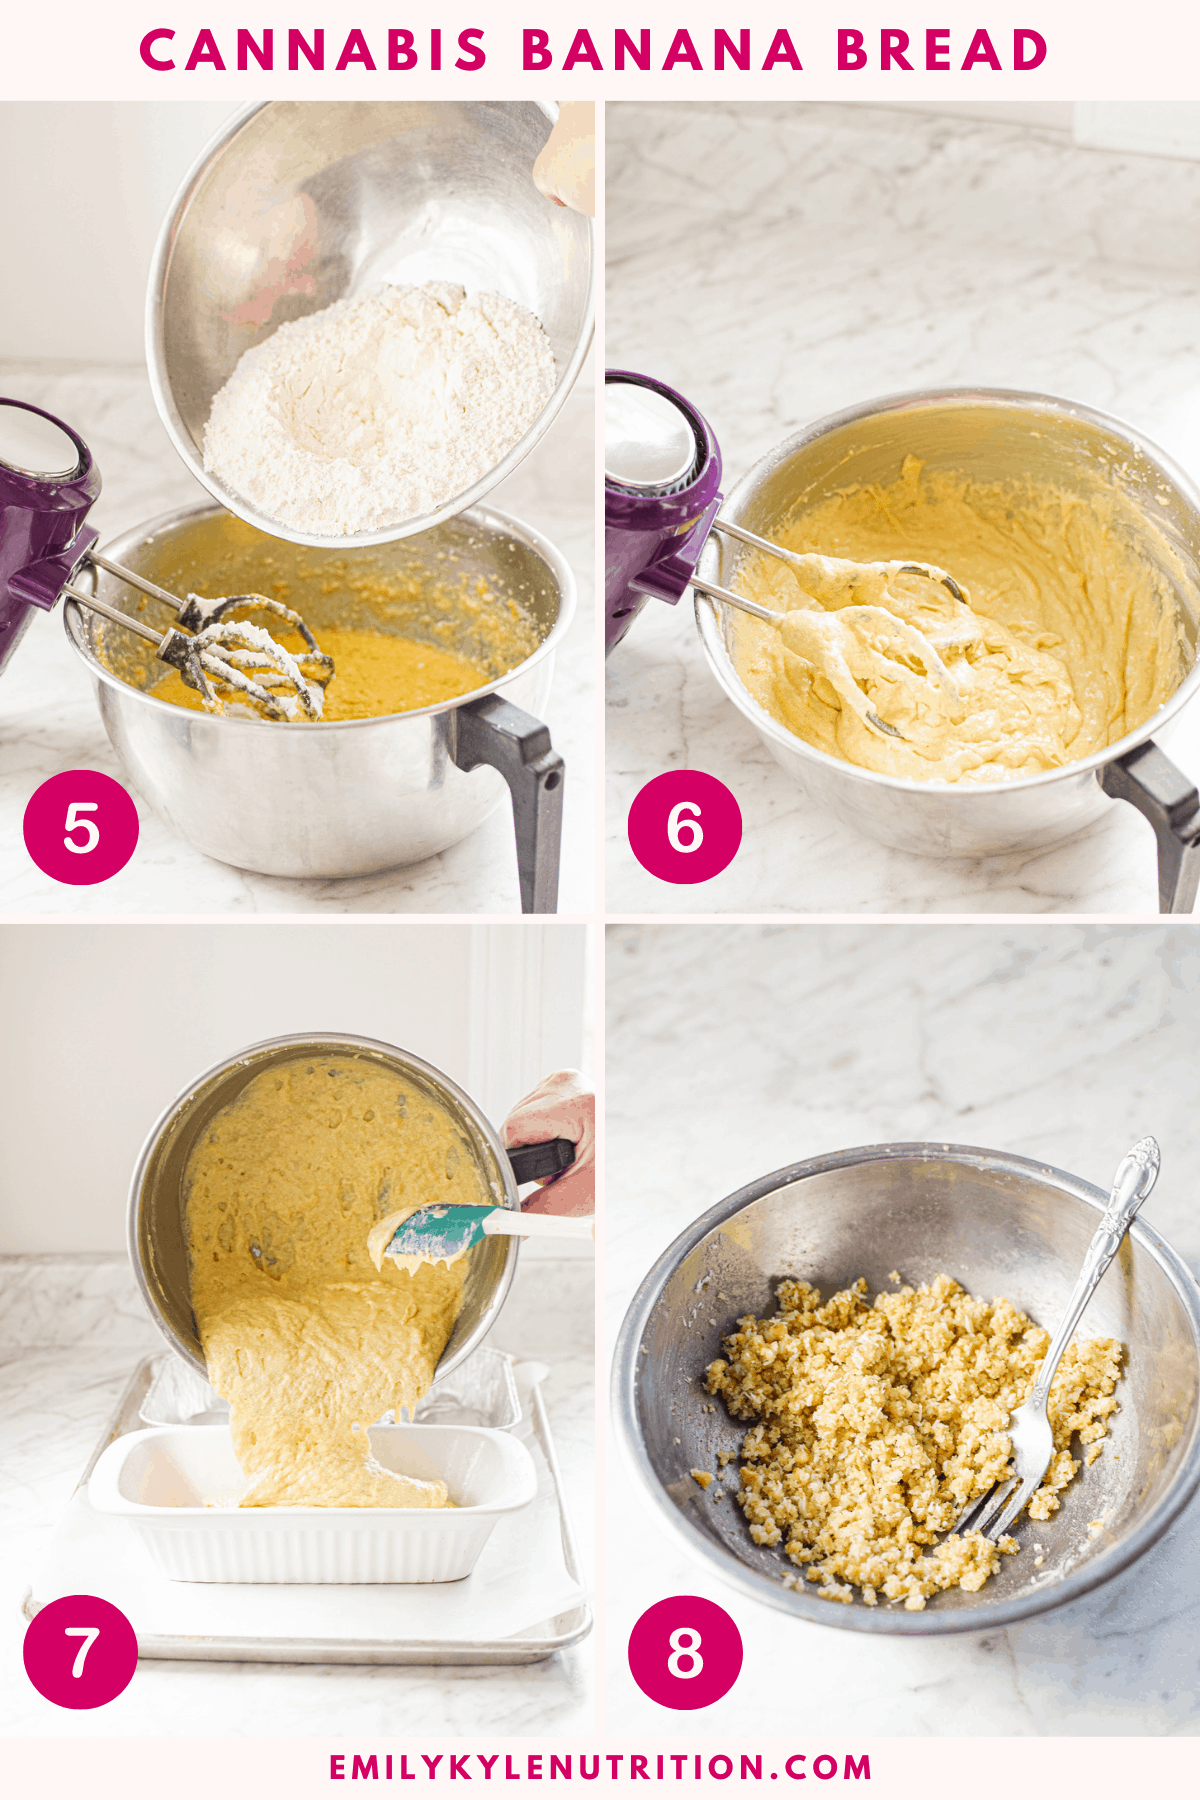 A 4 step collage showing steps 4-7 for making cannabis banana bread including adding the dry ingredients, mixing well, pouring into the pan, and making a streusel topping.